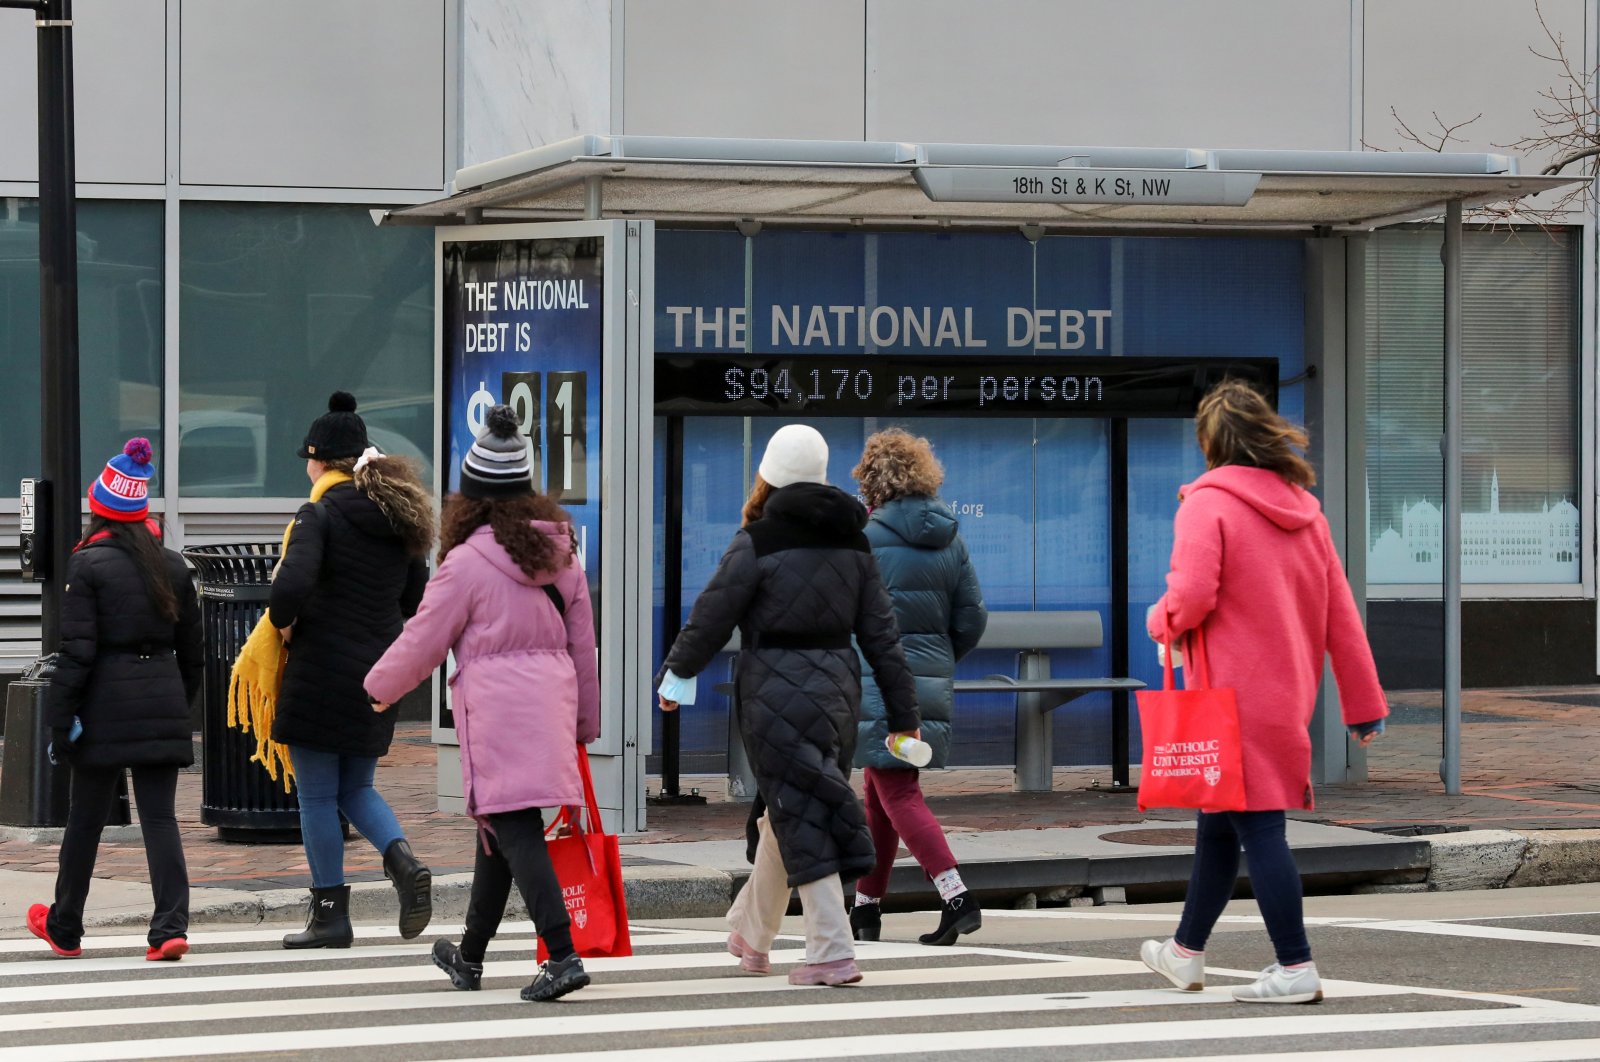 People cross the street next to a bus stop with a sign that shows a U.S. national debt figure in Washington, U.S., Jan. 20, 2023. (Reuters Photo)